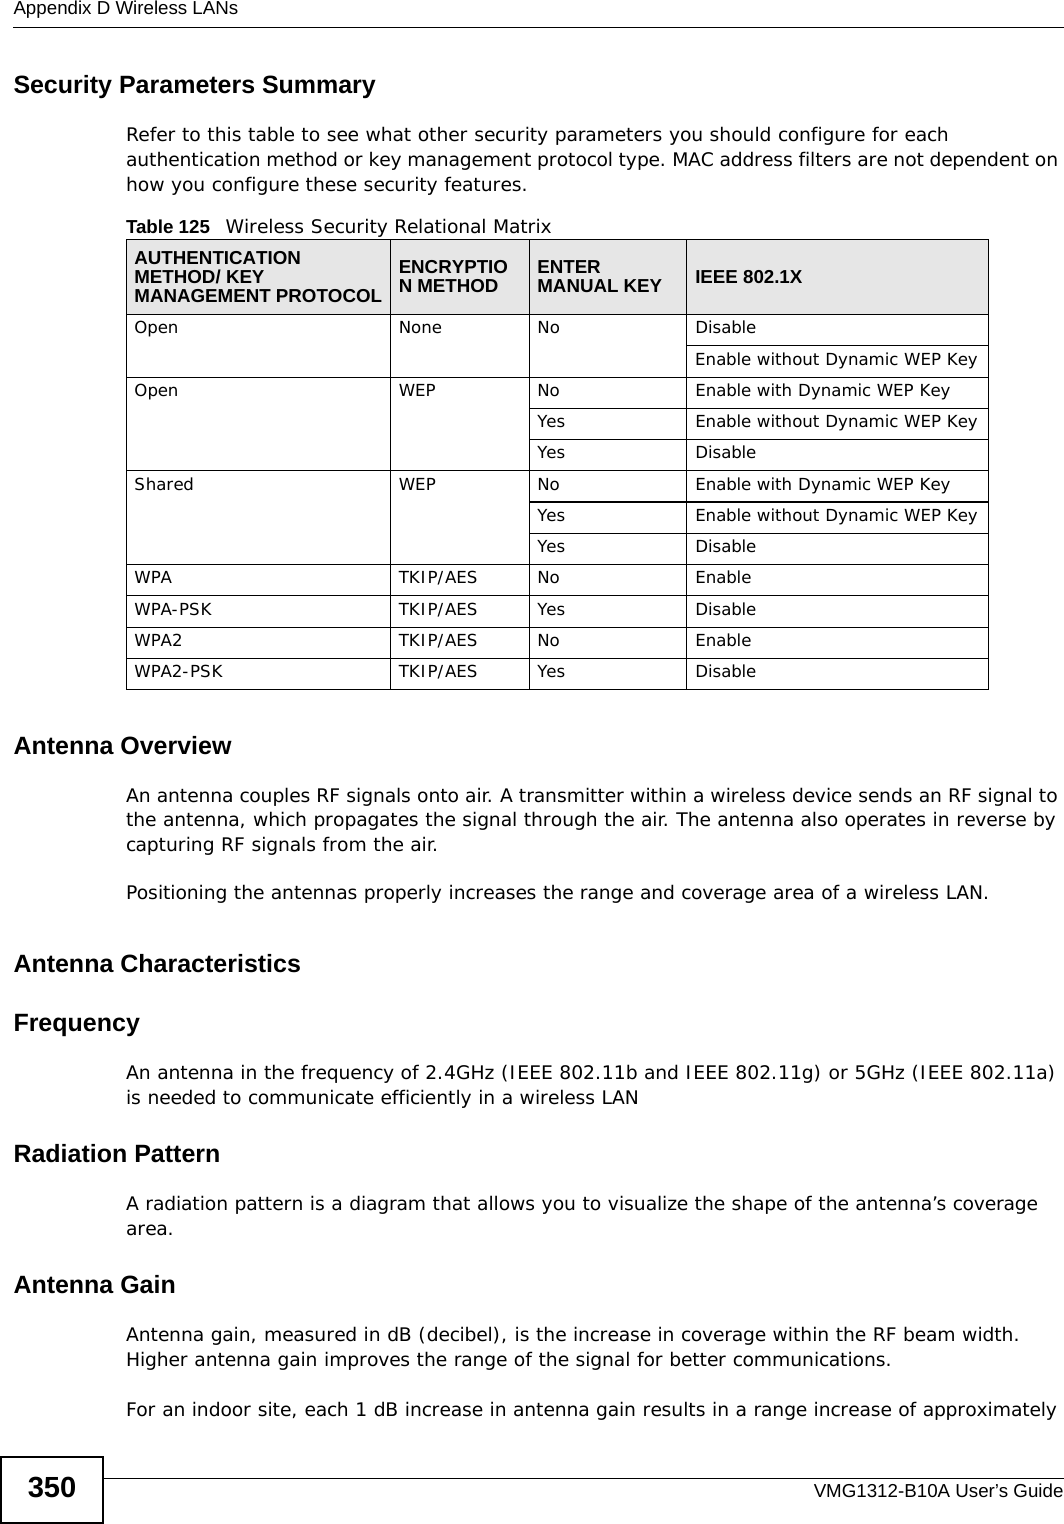 Appendix D Wireless LANsVMG1312-B10A User’s Guide350Security Parameters SummaryRefer to this table to see what other security parameters you should configure for each authentication method or key management protocol type. MAC address filters are not dependent on how you configure these security features.Antenna OverviewAn antenna couples RF signals onto air. A transmitter within a wireless device sends an RF signal to the antenna, which propagates the signal through the air. The antenna also operates in reverse by capturing RF signals from the air. Positioning the antennas properly increases the range and coverage area of a wireless LAN. Antenna CharacteristicsFrequencyAn antenna in the frequency of 2.4GHz (IEEE 802.11b and IEEE 802.11g) or 5GHz (IEEE 802.11a) is needed to communicate efficiently in a wireless LANRadiation PatternA radiation pattern is a diagram that allows you to visualize the shape of the antenna’s coverage area. Antenna GainAntenna gain, measured in dB (decibel), is the increase in coverage within the RF beam width. Higher antenna gain improves the range of the signal for better communications. For an indoor site, each 1 dB increase in antenna gain results in a range increase of approximately Table 125   Wireless Security Relational MatrixAUTHENTICATION METHOD/ KEY MANAGEMENT PROTOCOLENCRYPTION METHOD ENTER MANUAL KEY IEEE 802.1XOpen None No DisableEnable without Dynamic WEP KeyOpen WEP No           Enable with Dynamic WEP KeyYes Enable without Dynamic WEP KeyYes DisableShared WEP  No           Enable with Dynamic WEP KeyYes Enable without Dynamic WEP KeyYes DisableWPA  TKIP/AES No EnableWPA-PSK  TKIP/AES Yes DisableWPA2 TKIP/AES No EnableWPA2-PSK  TKIP/AES Yes Disable